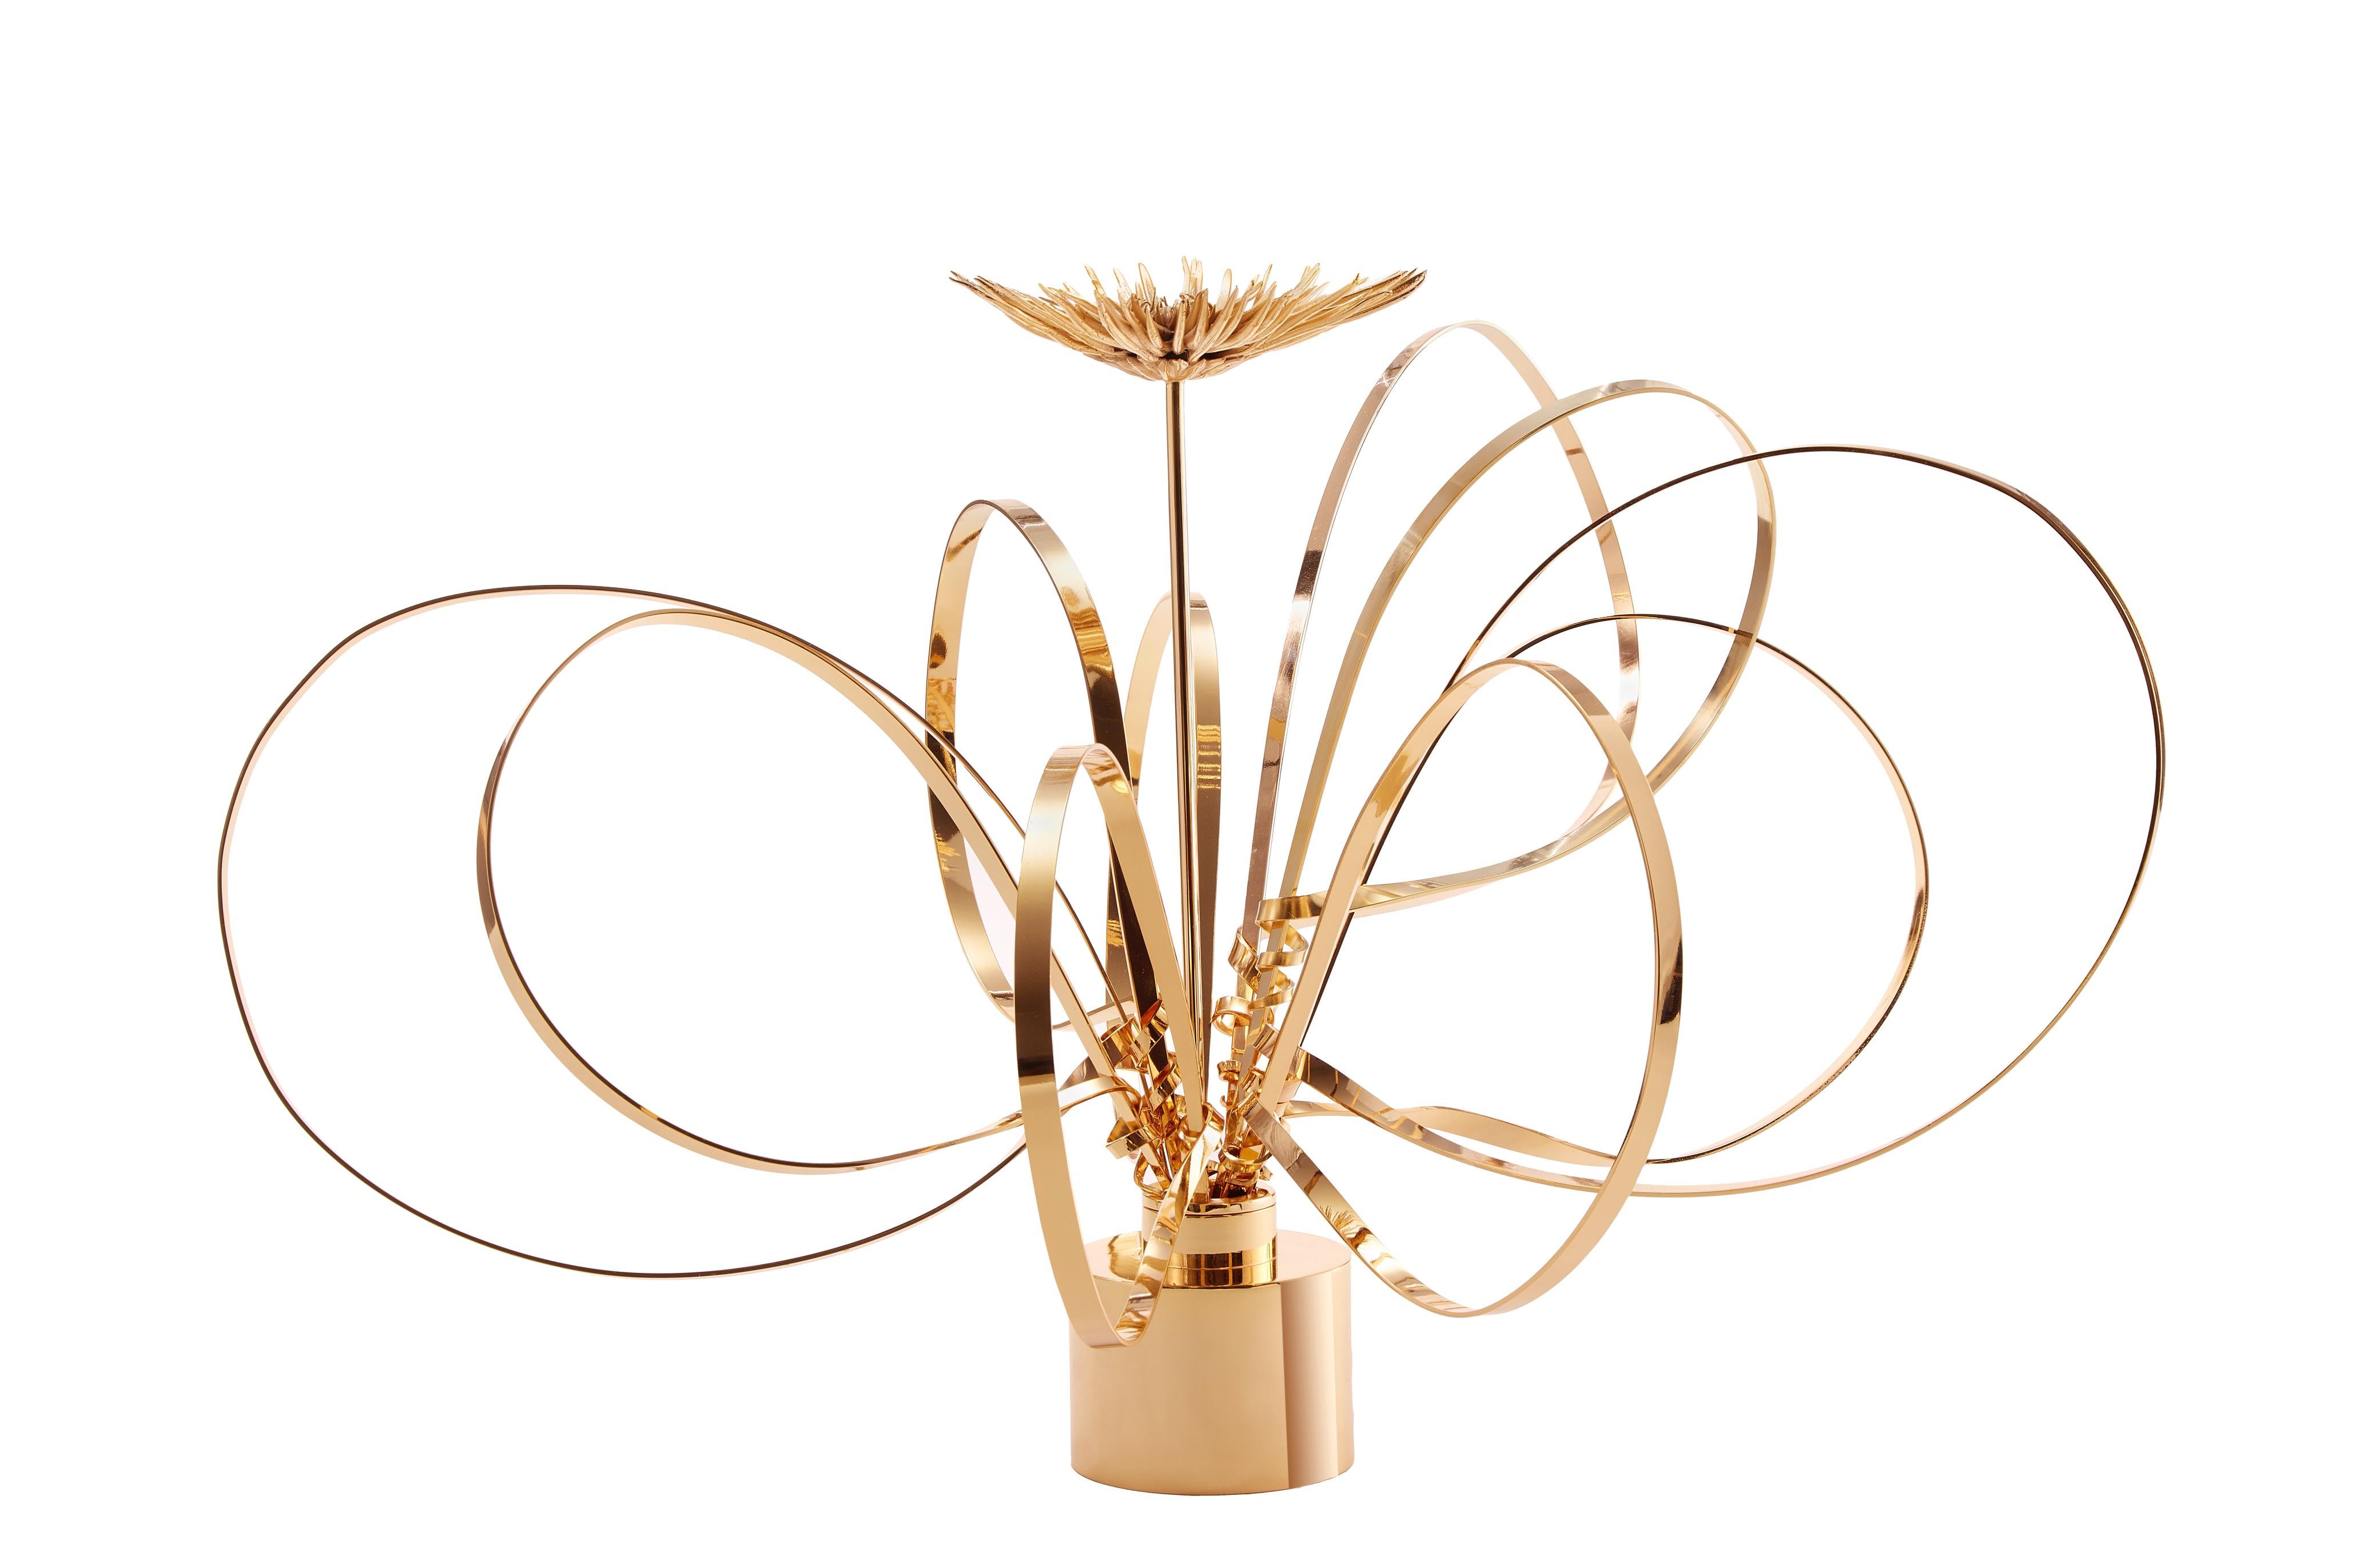 Golden Swirls and Mum by Art Flower Maker
Unique Piece.
Dimensions: Ø 59 x H 33 cm.
Materials: 24 K Gold Plated Brass.

The artistic eye of The Art Flower Maker combined with Italian artisanal metalwork has brought to life these unique pieces which